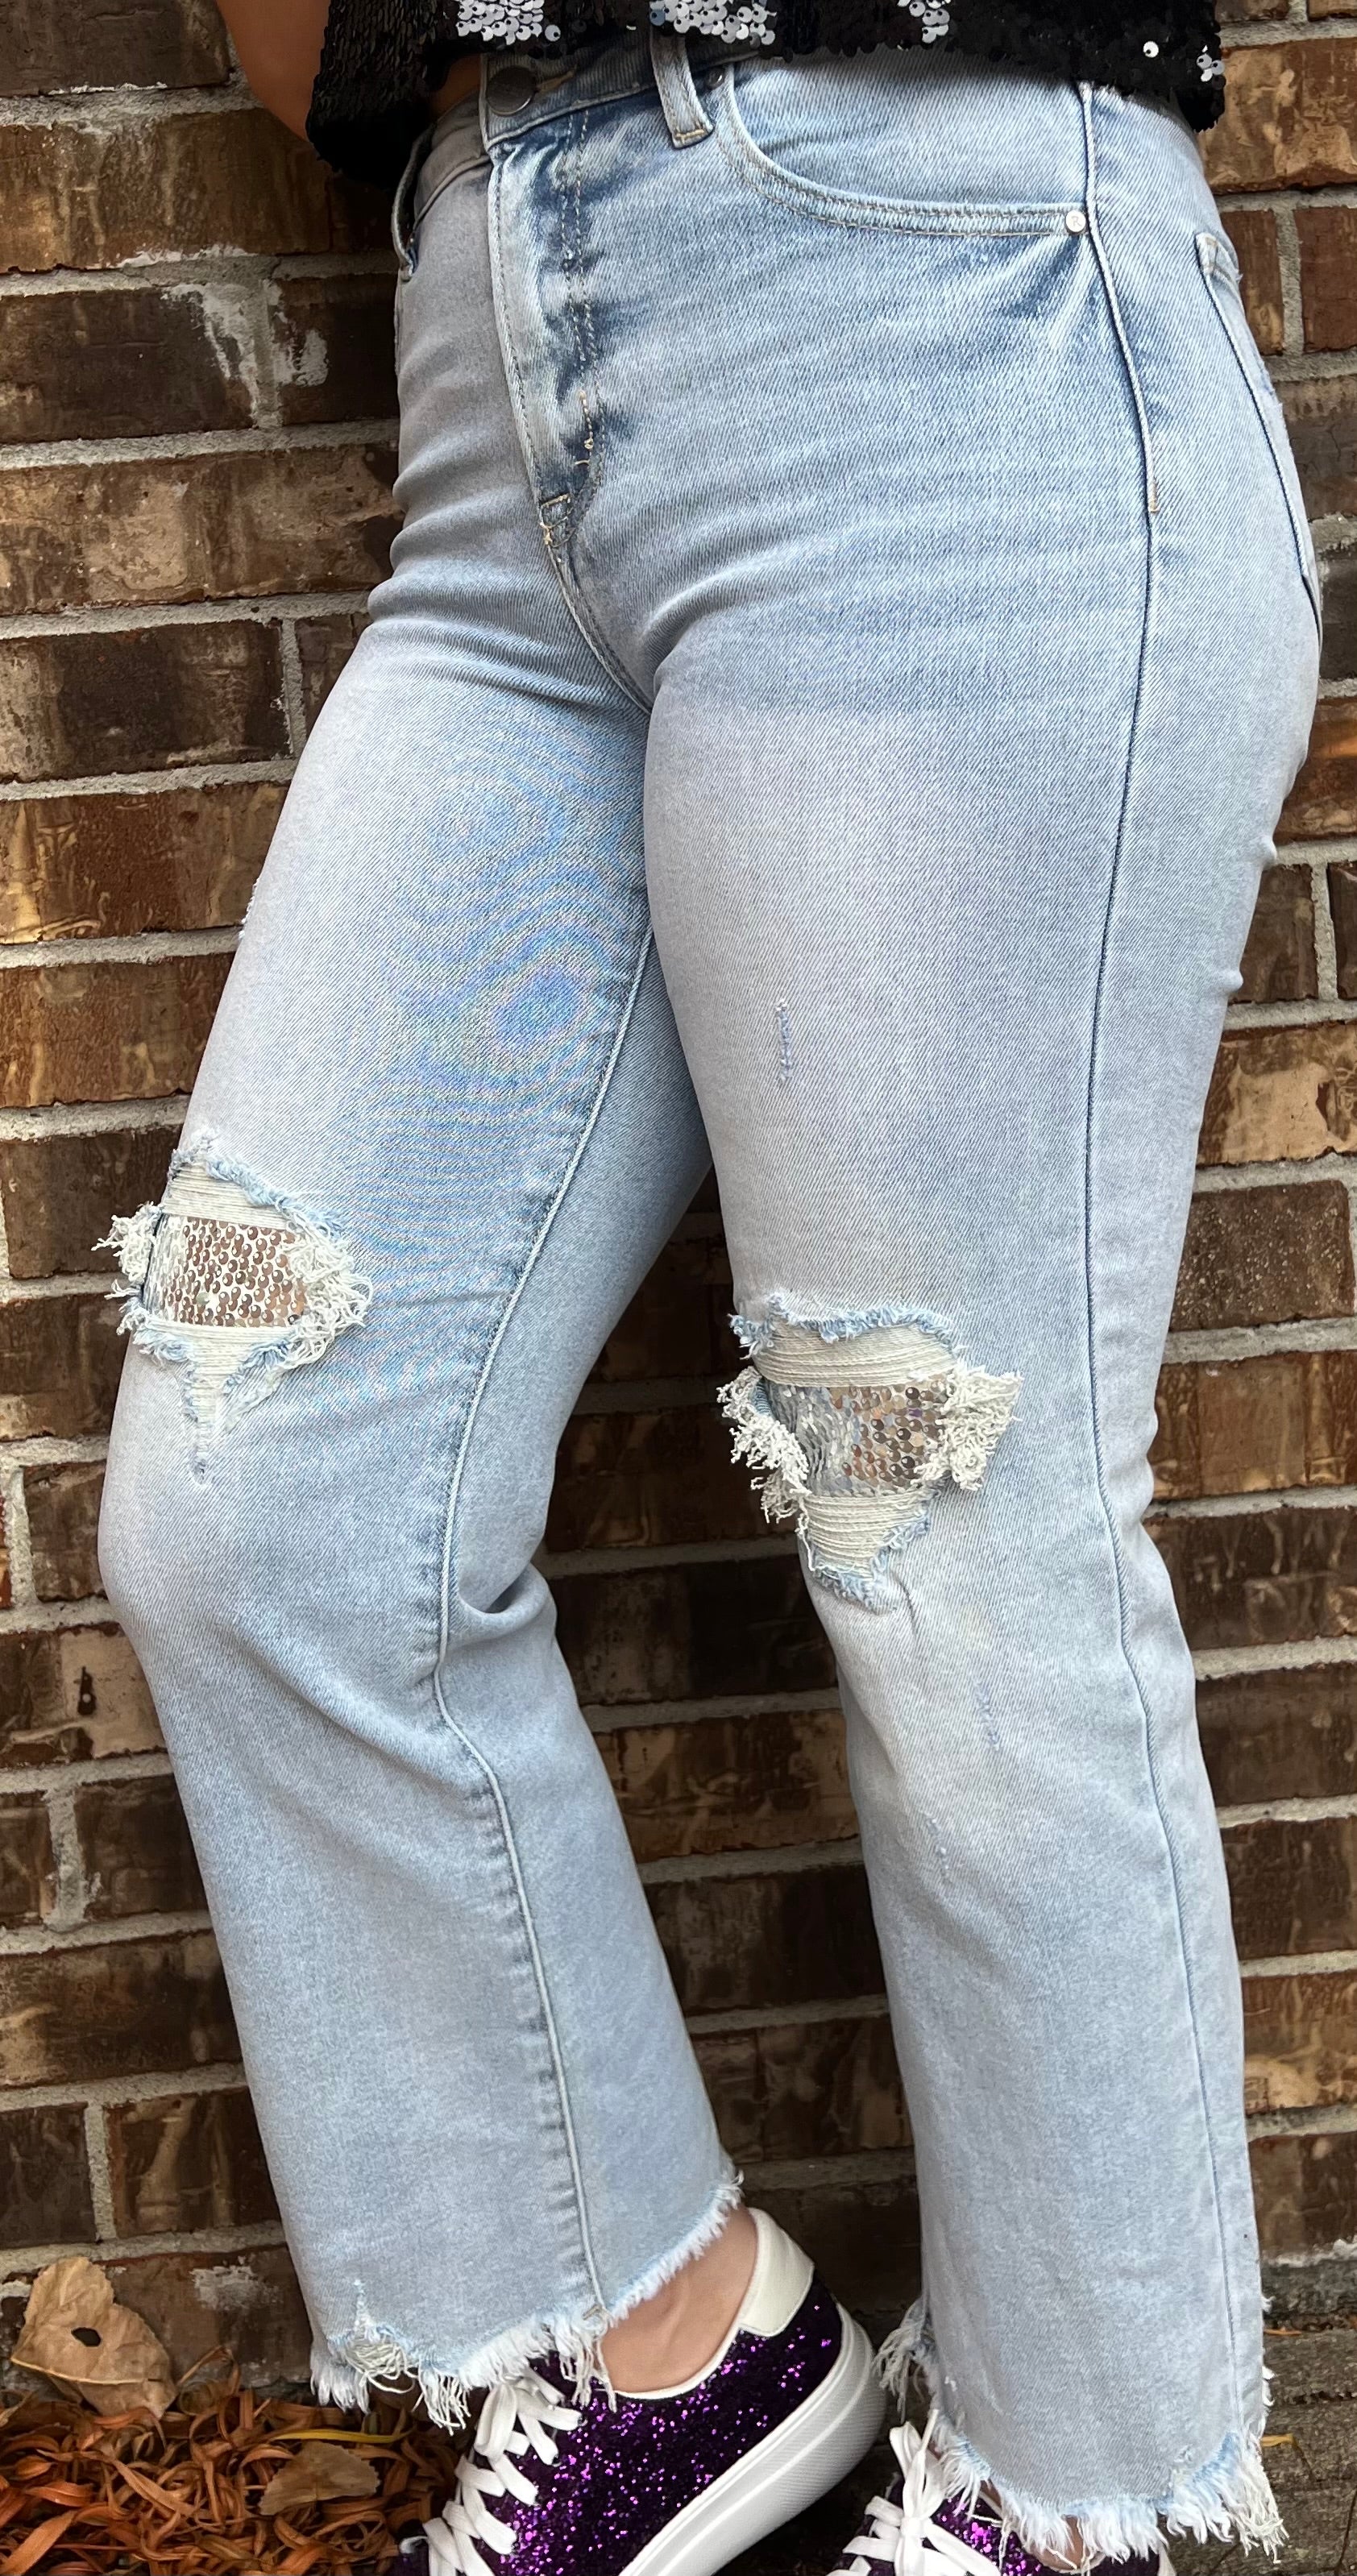 Risen Hint of Sparkle Distressed Jeans